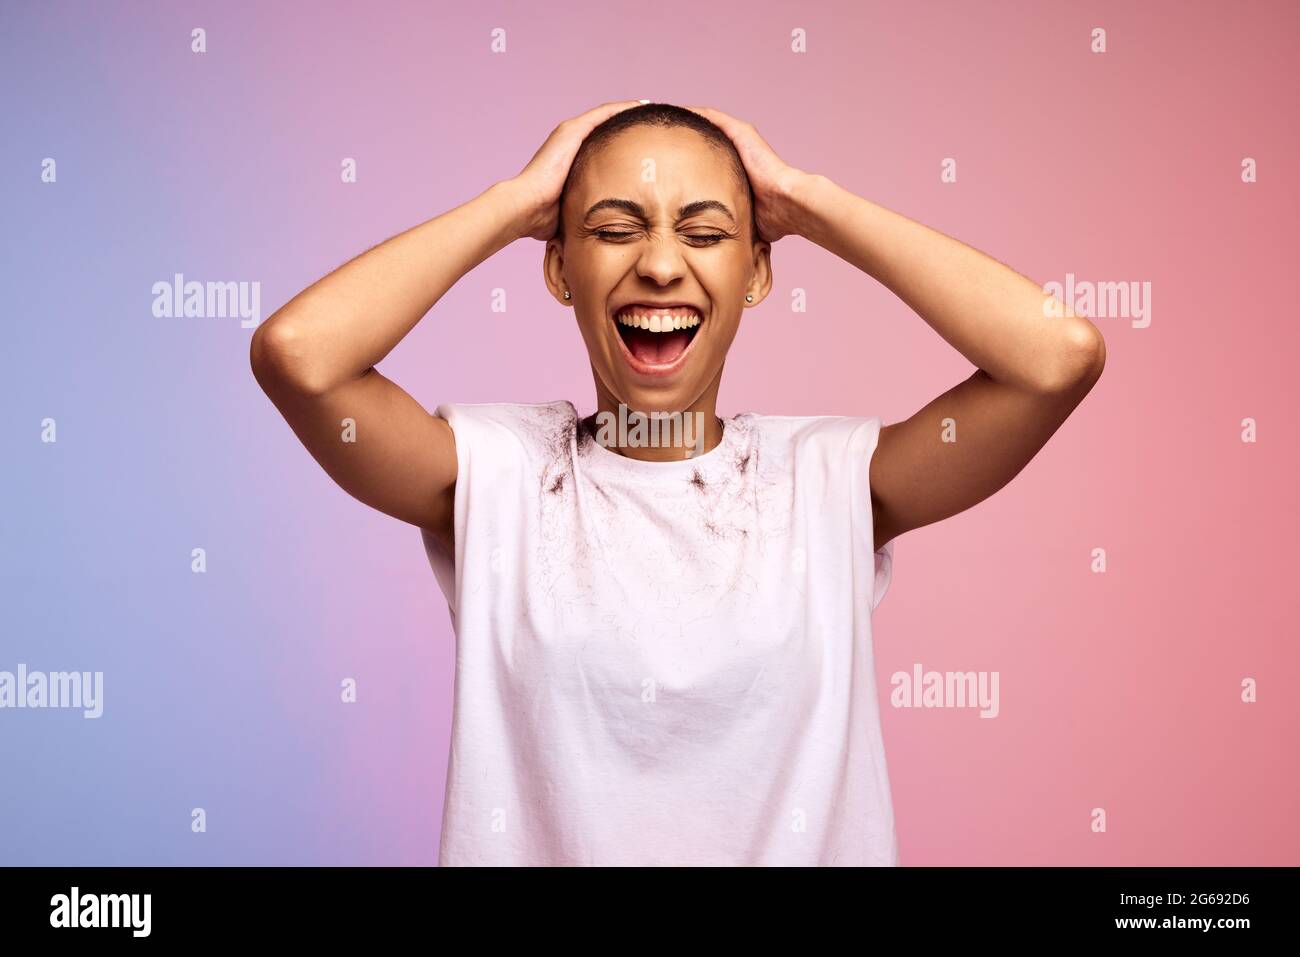 Happy woman with shaved head on gradient background. Confident and liberated female with short hair. Stock Photo